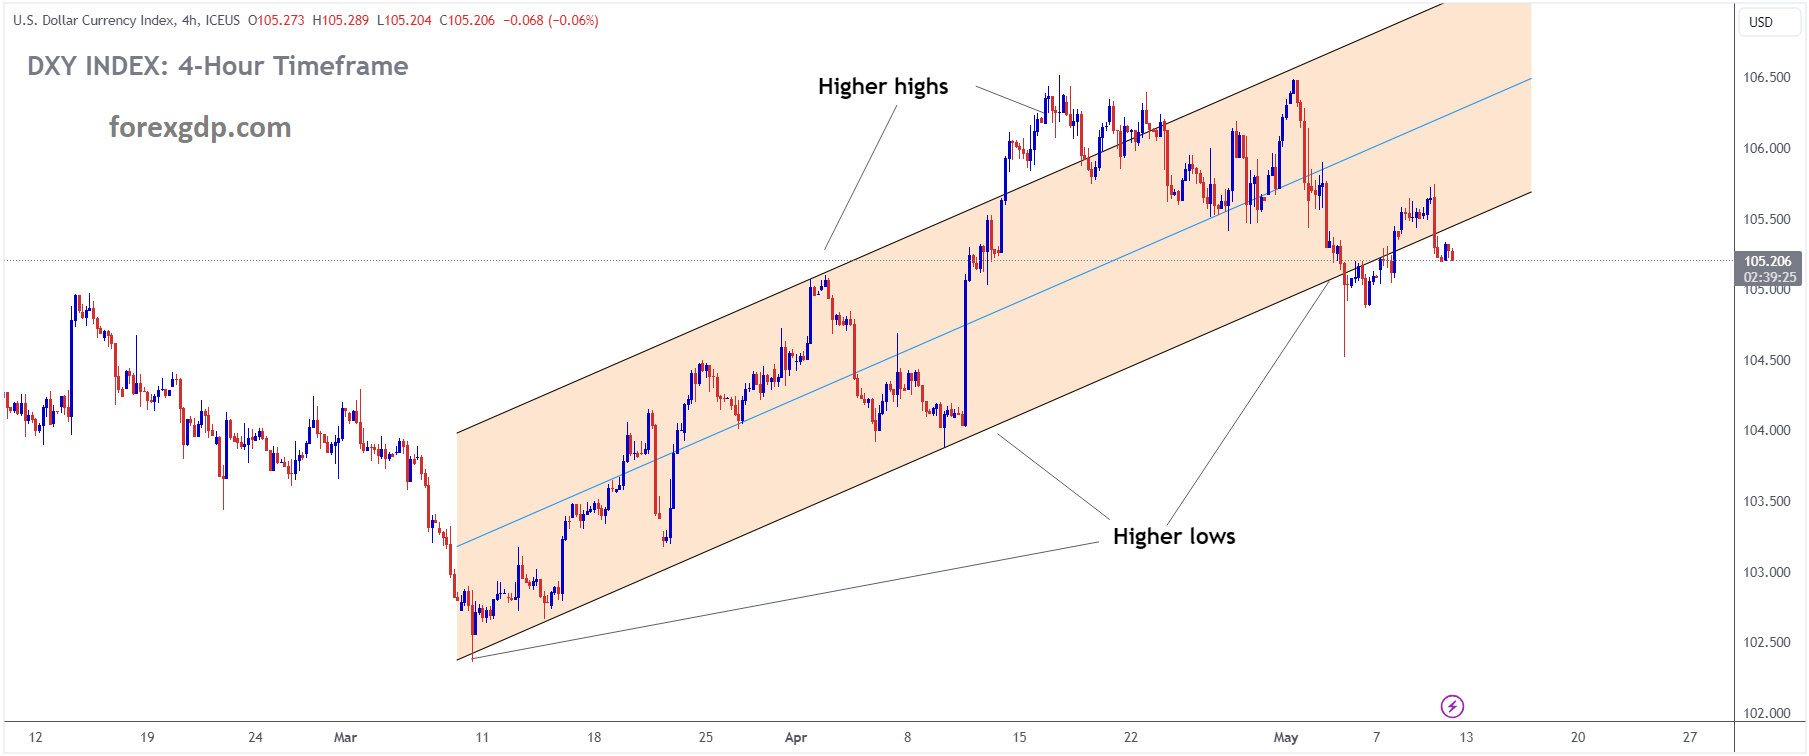 USD INDEX is moving in an Ascending channel and the market has reached the higher low area of the channel